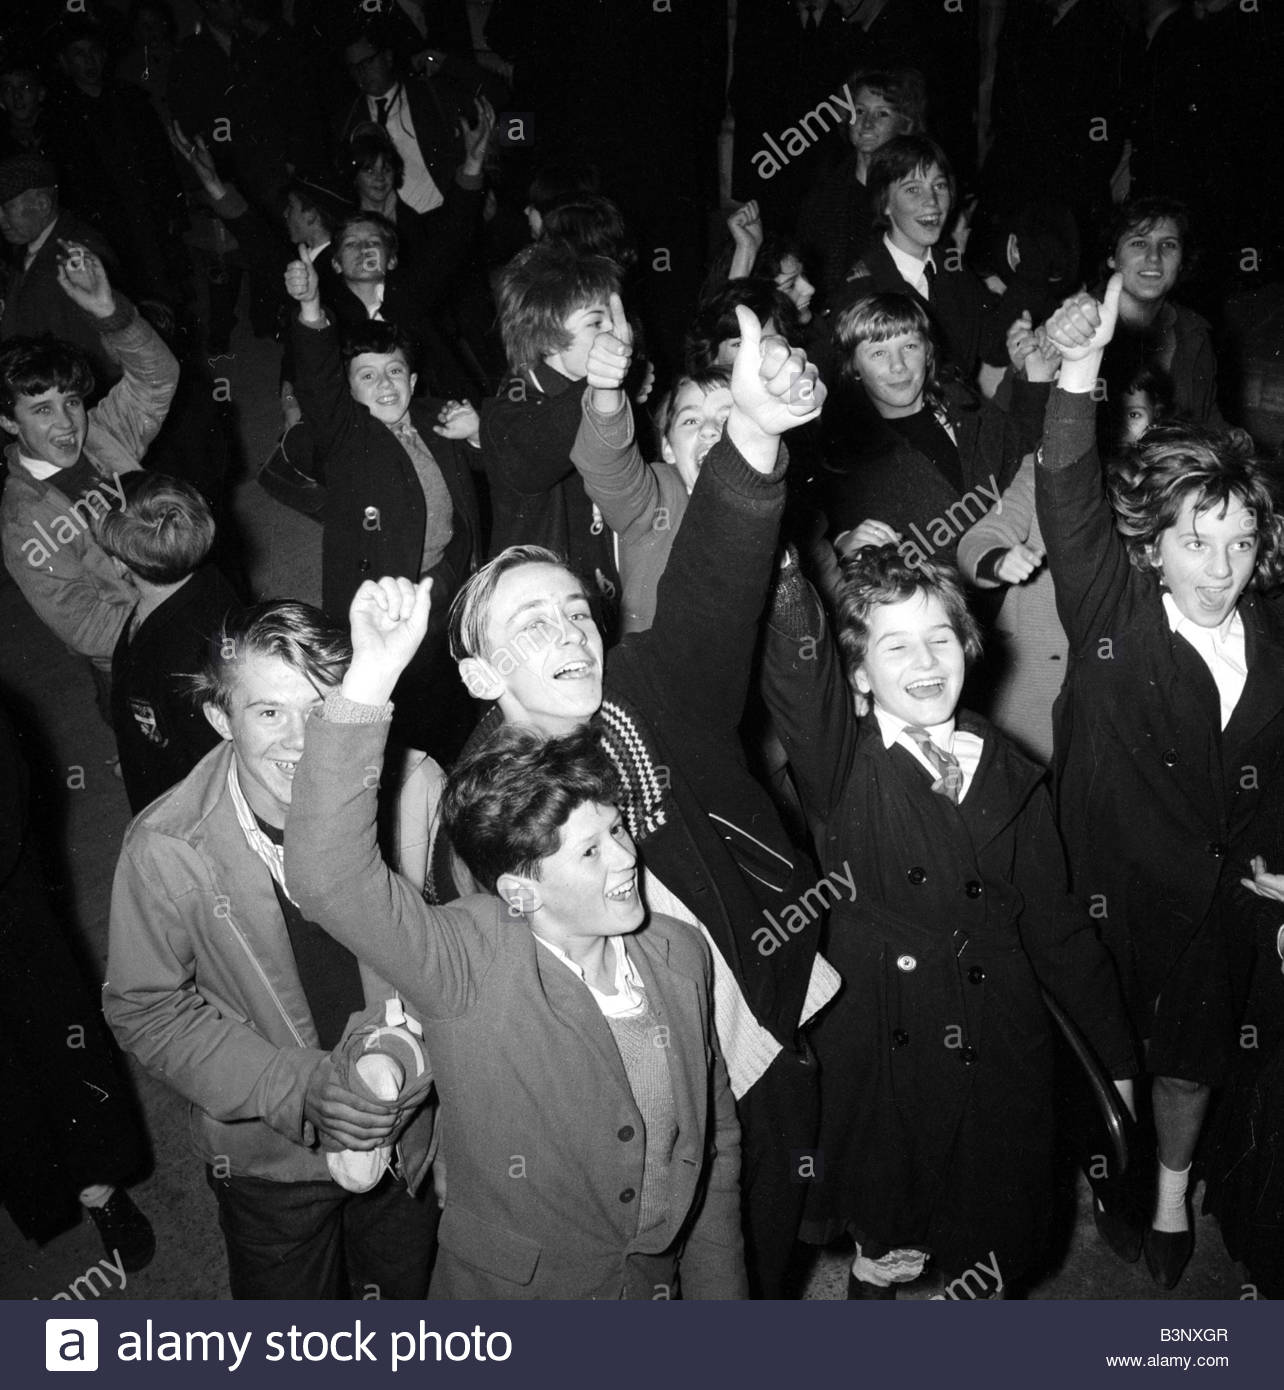 The Beatles 1963 Black and White Stock Photos & Images - Page 2 - Alamy